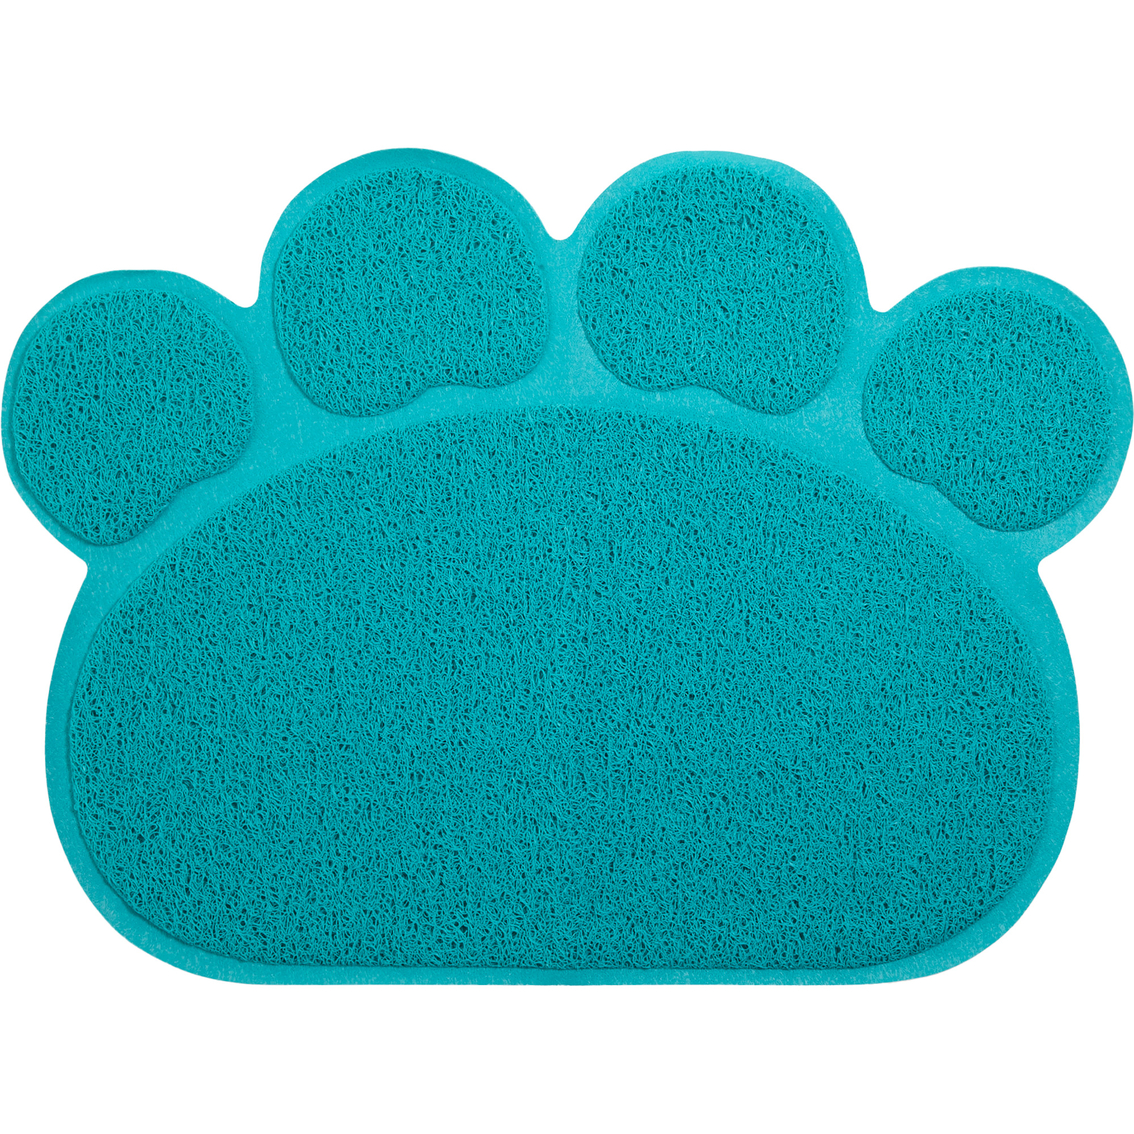 So Phresh Blue Paw Shaped Cat Litter Trapper Mat - Image 1 of 4